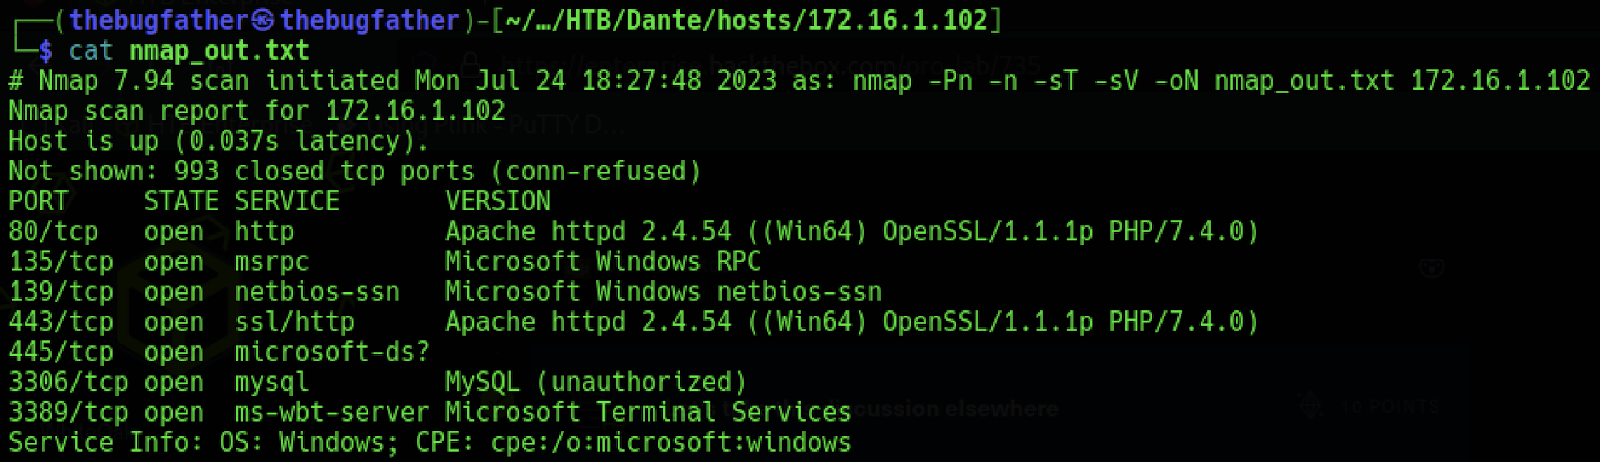 For this example, white oak security decided to target the host 172.16.1.102. After running a Nmap port scan and further investigating, it revealed that the only port of interest seemed to be a web application running on default HTTP port 80.